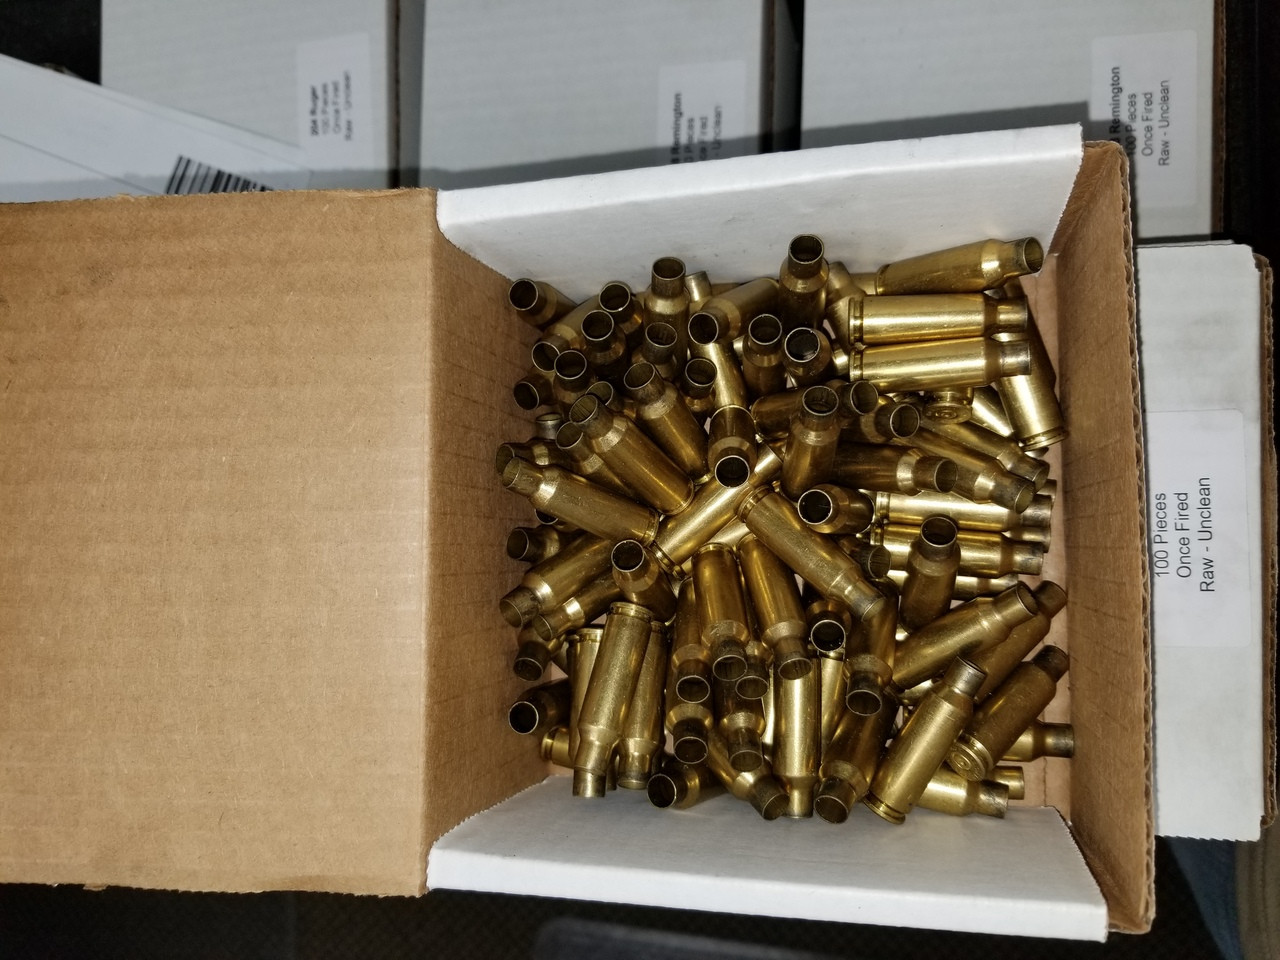 38 Special once fired brass casings - Other Reloading Supplies at